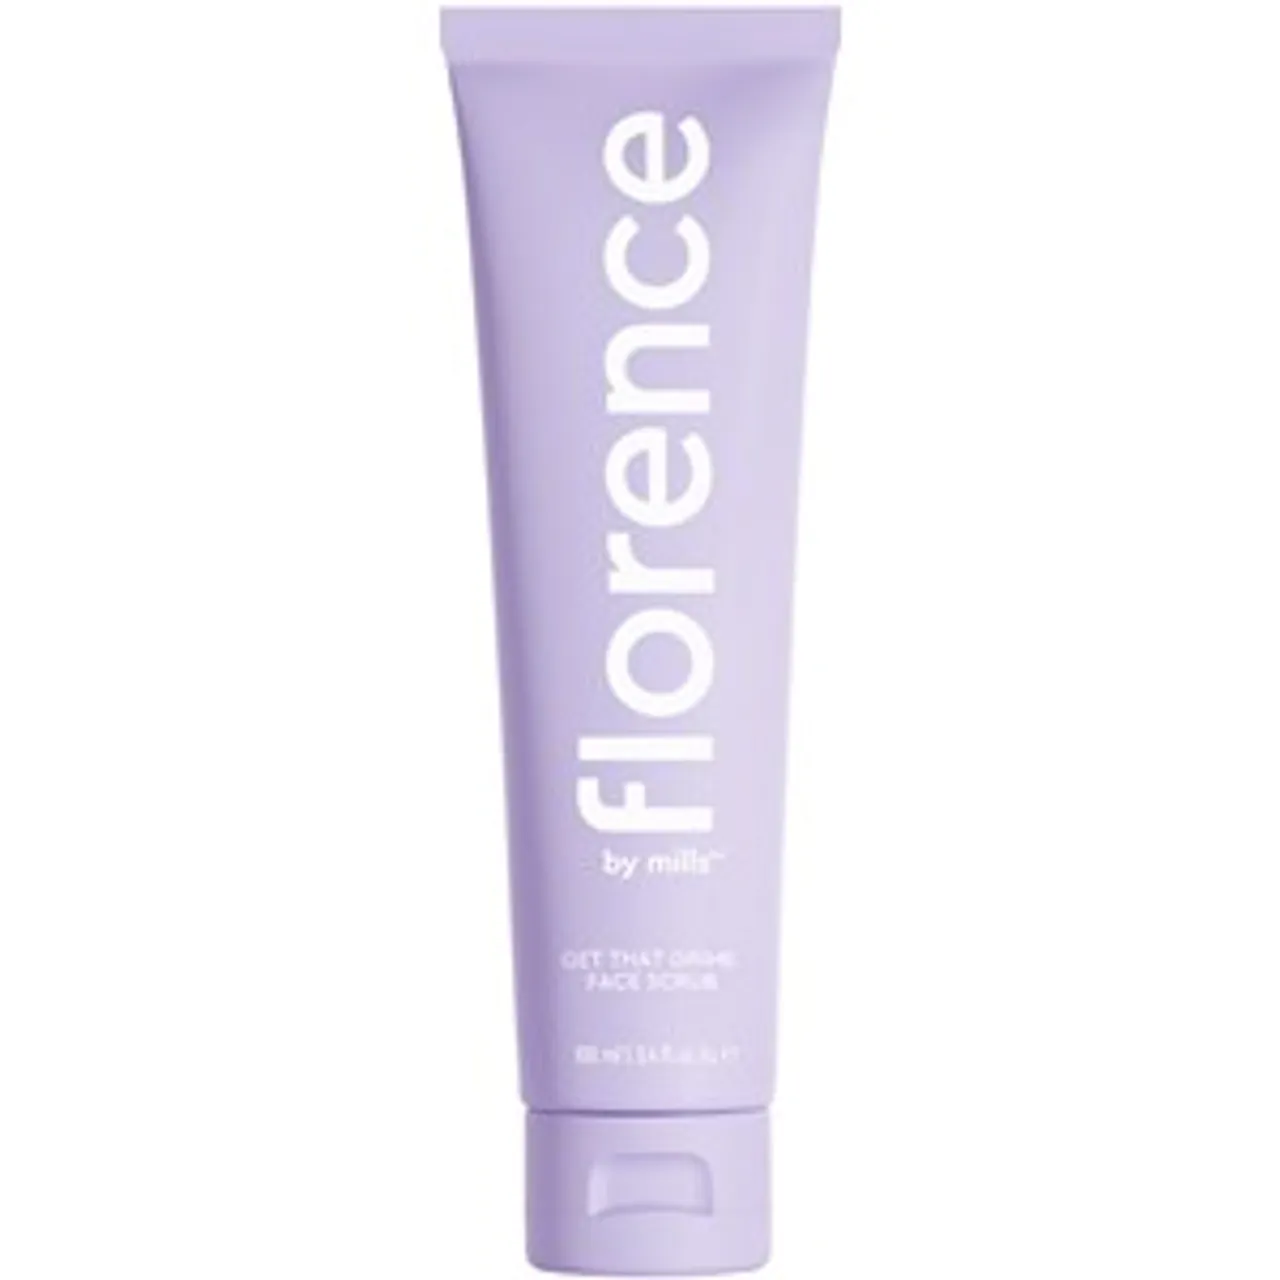 florence by mills Get That Grime Face Scrub Female 100 ml